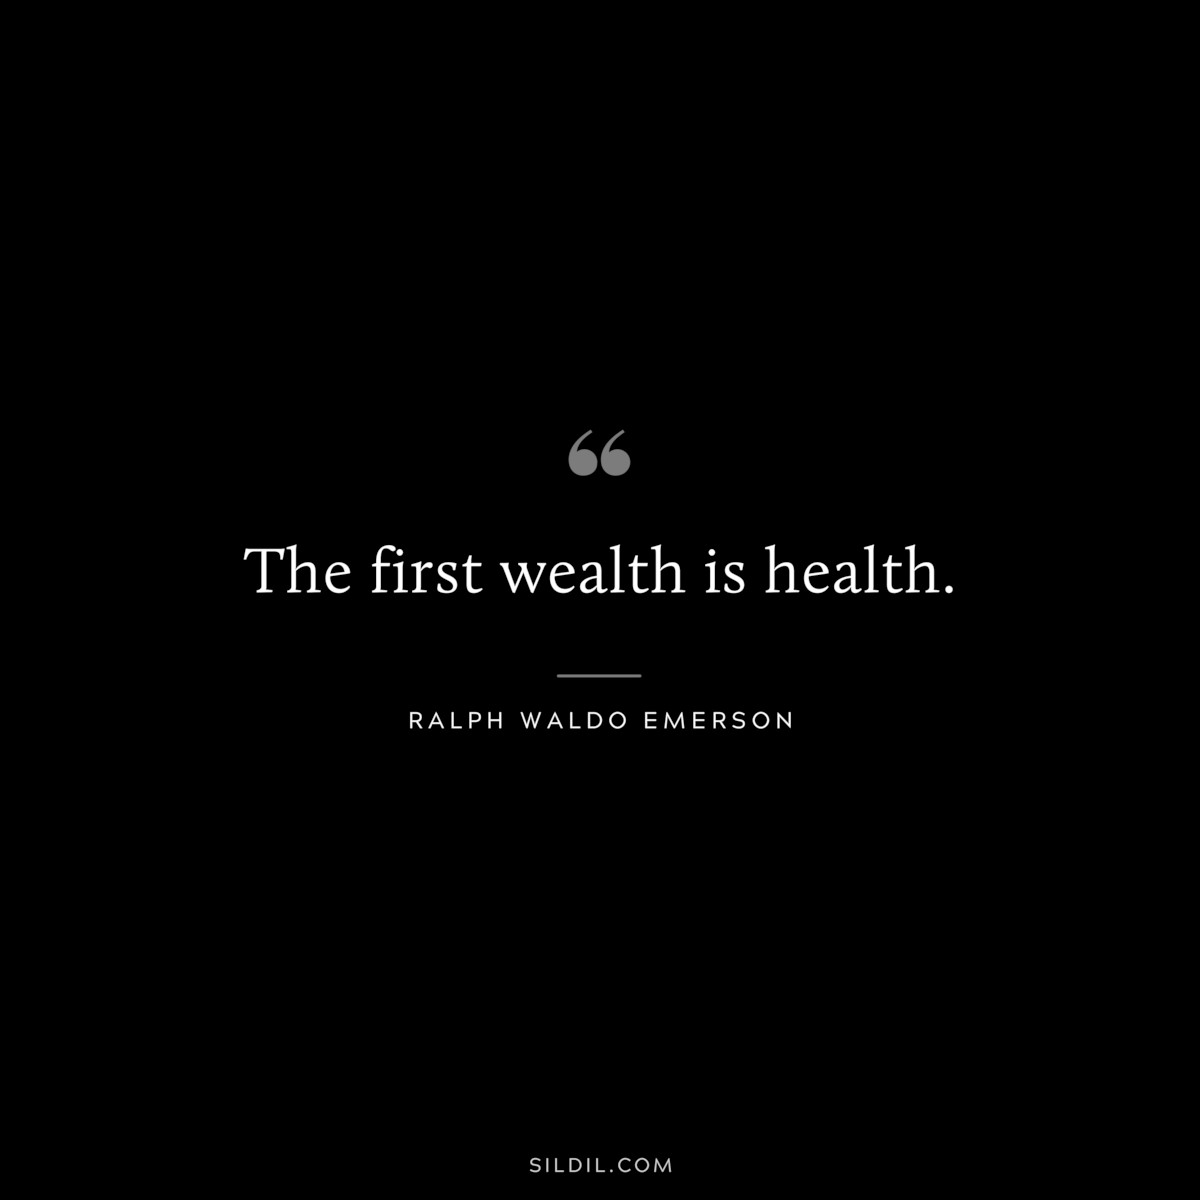 The first wealth is health. — Ralph Waldo Emerson